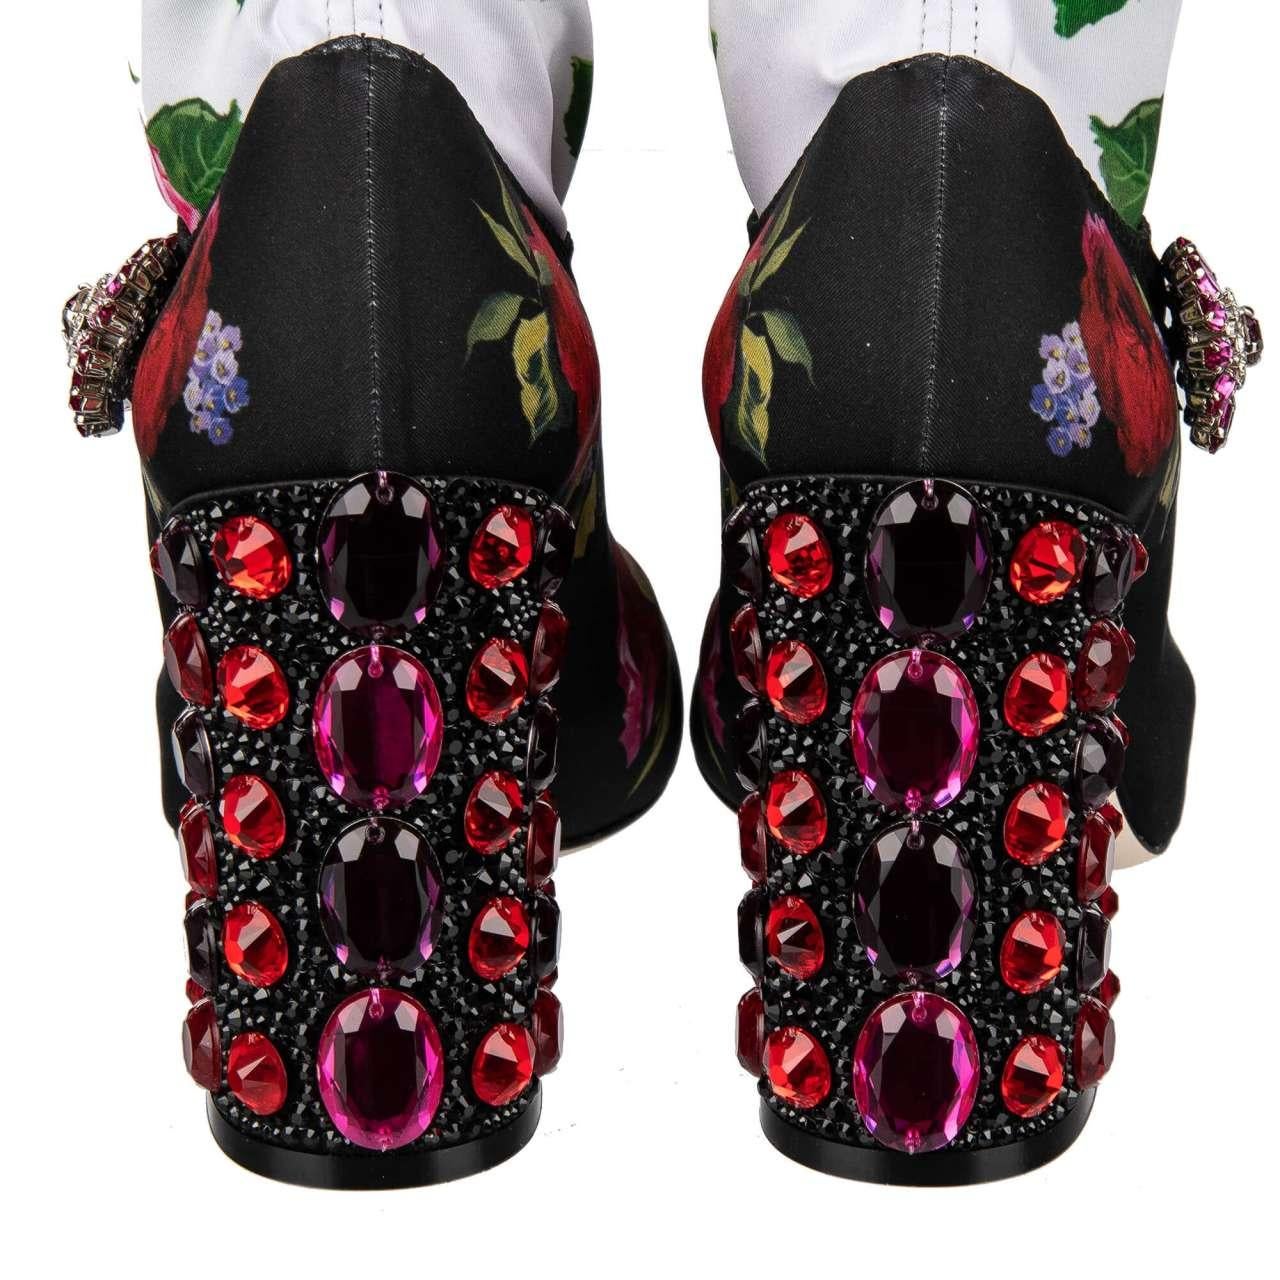 D&G Roses Printed Elastic Socks Pumps VALLY with Crystals Heel Black White 40 For Sale 2